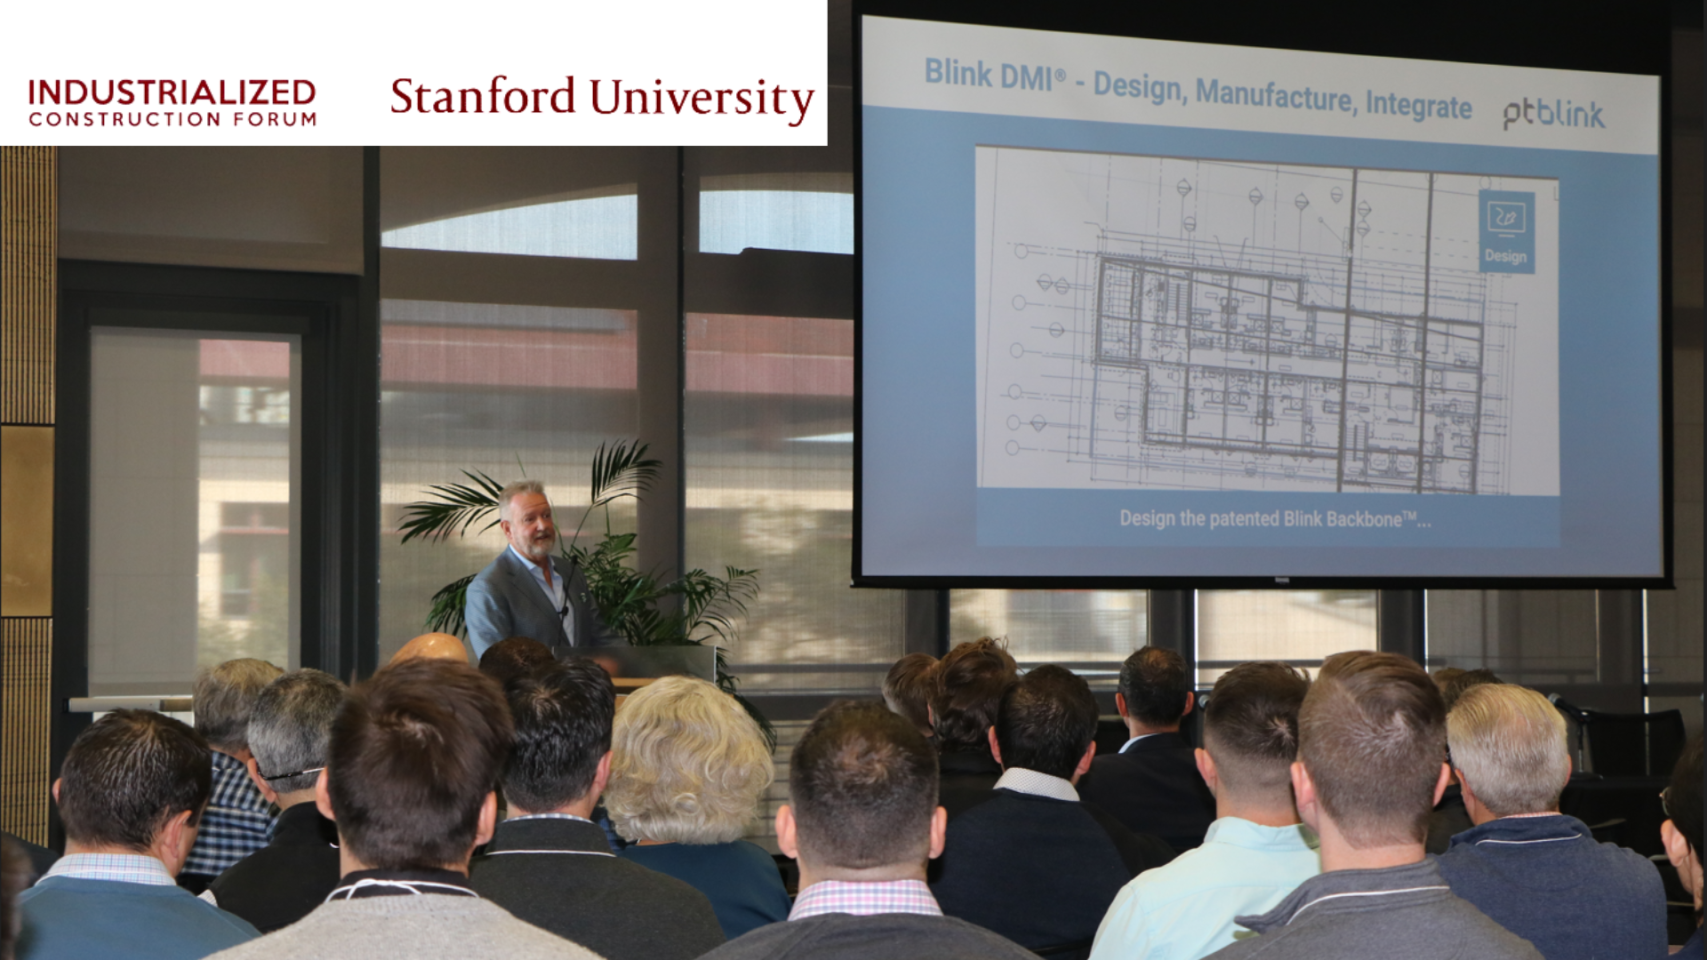 Murray Ellen presenting at the Stanford University Industrialized Construction Forum, February 2023.